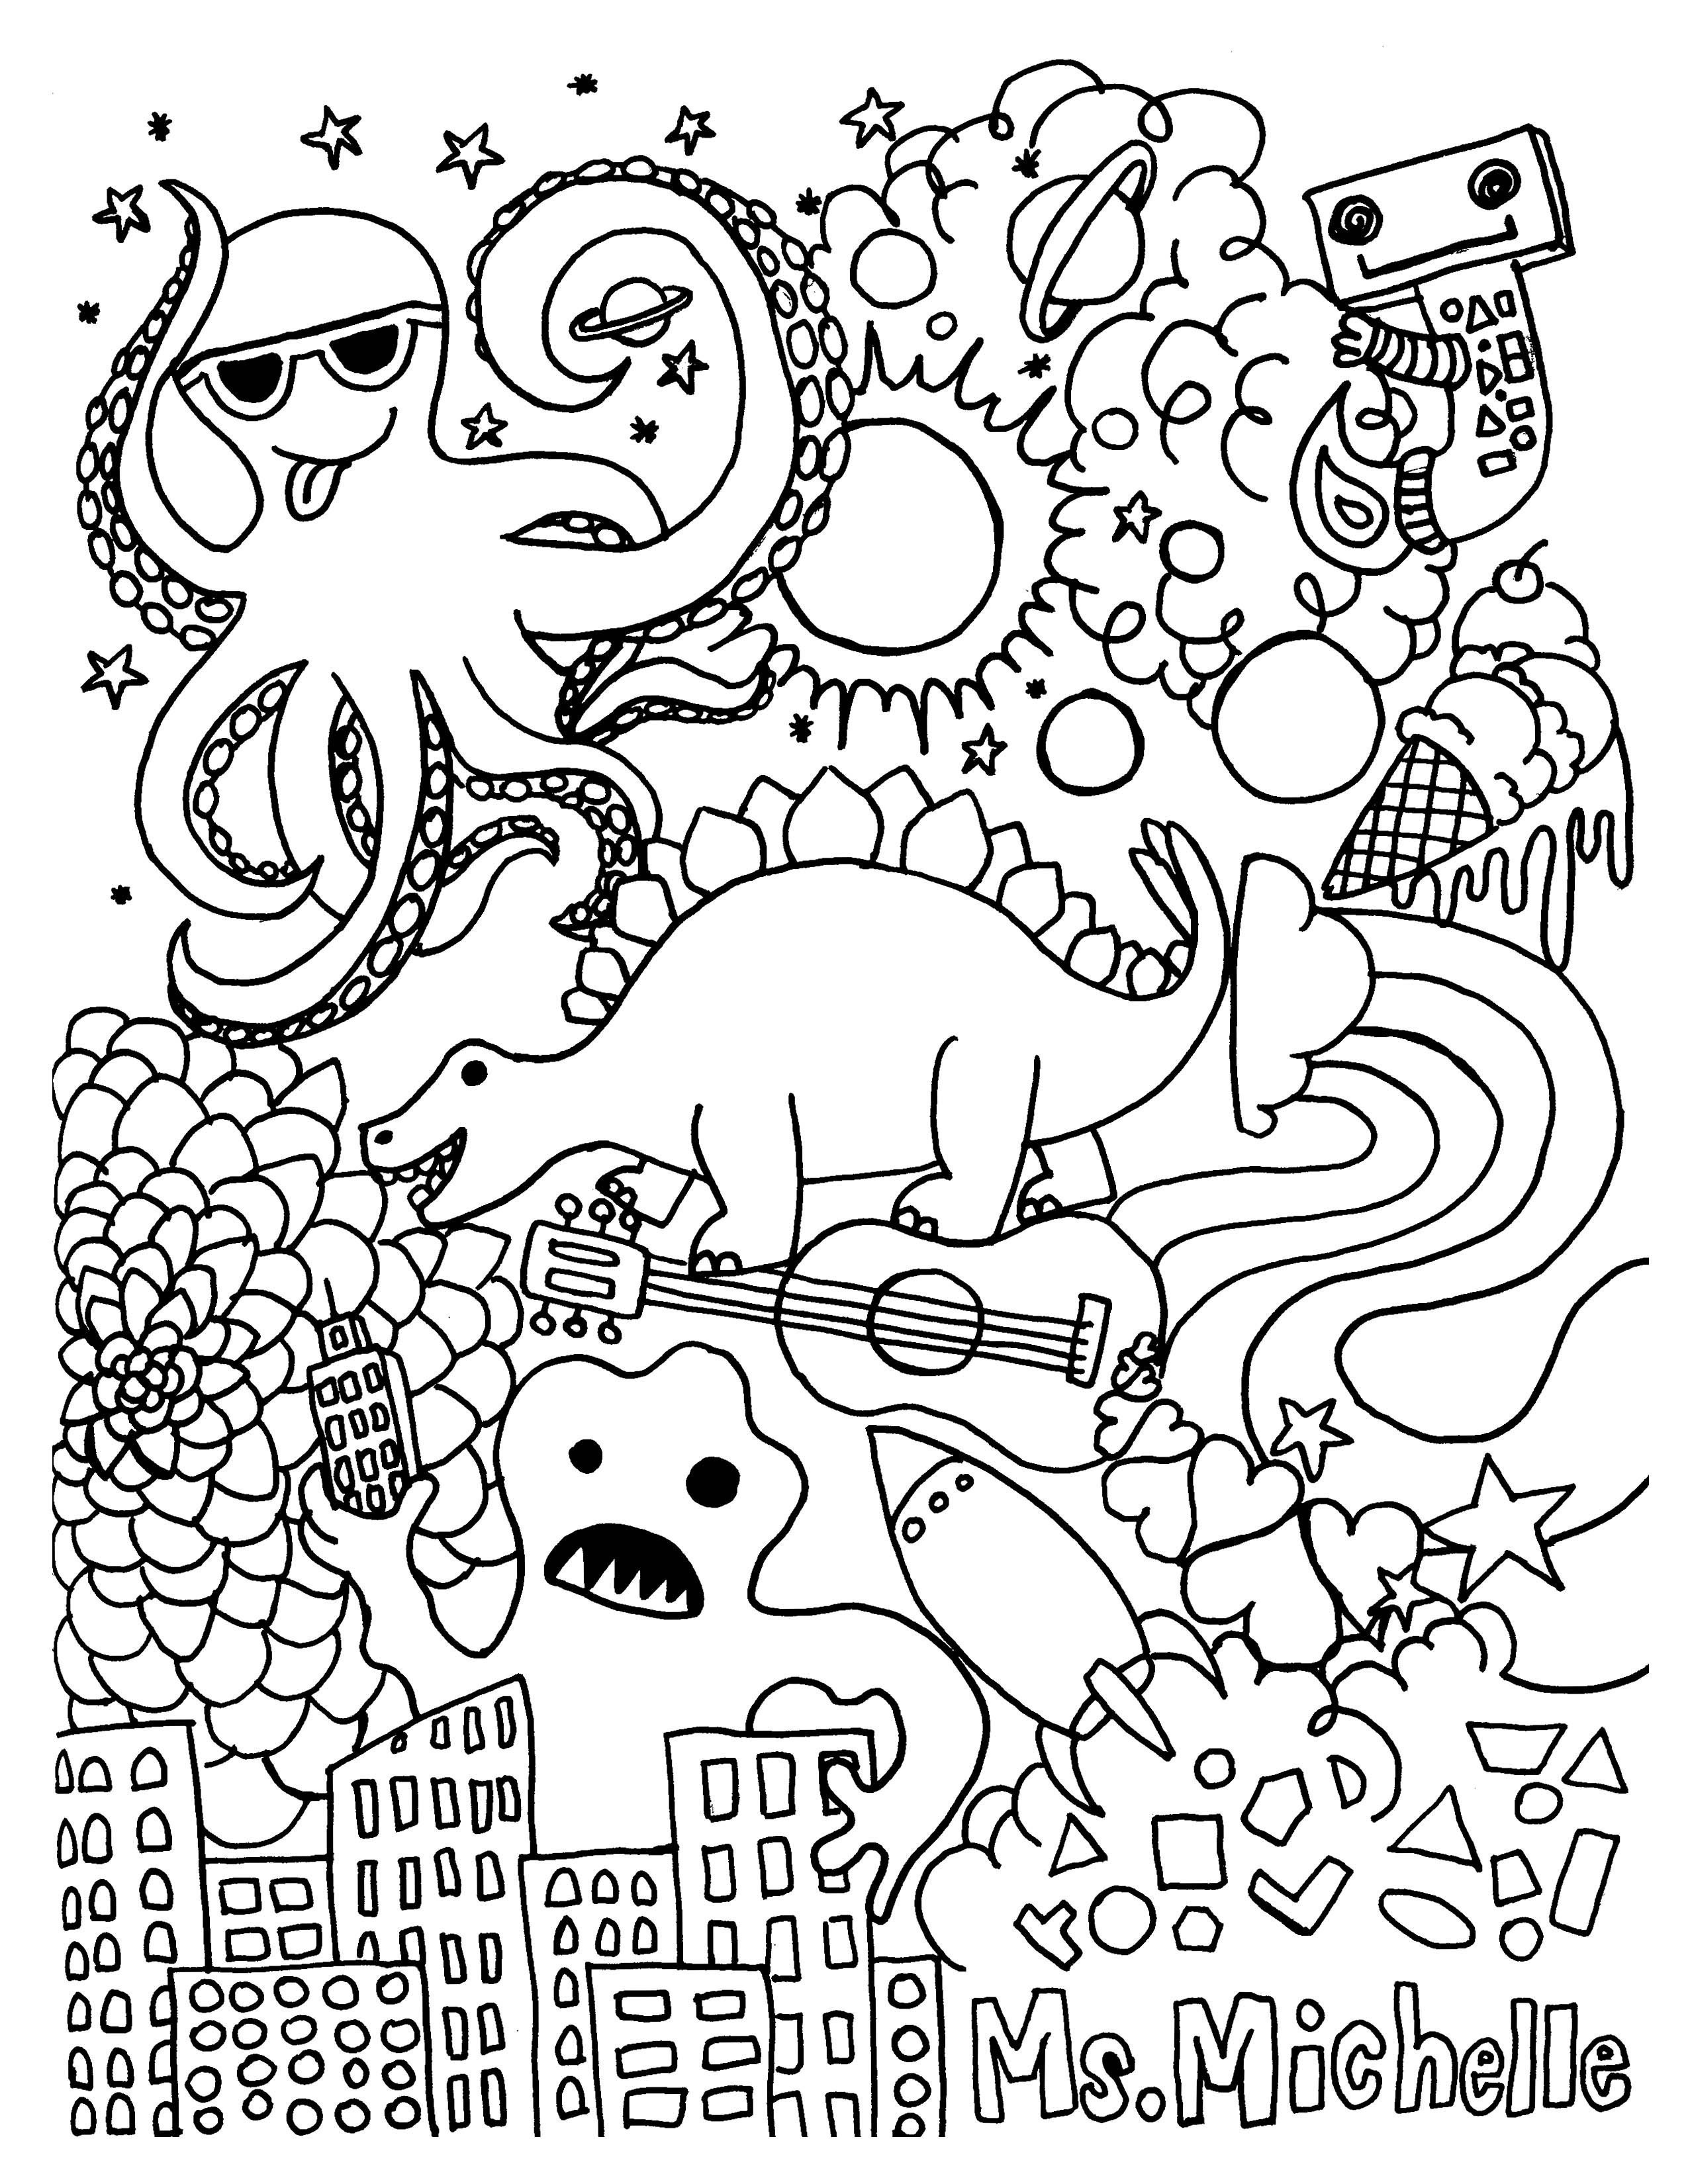 Saraswati Coloring Pages Coloring Extraordinary Instrument Coloring Pages Picture Ideas